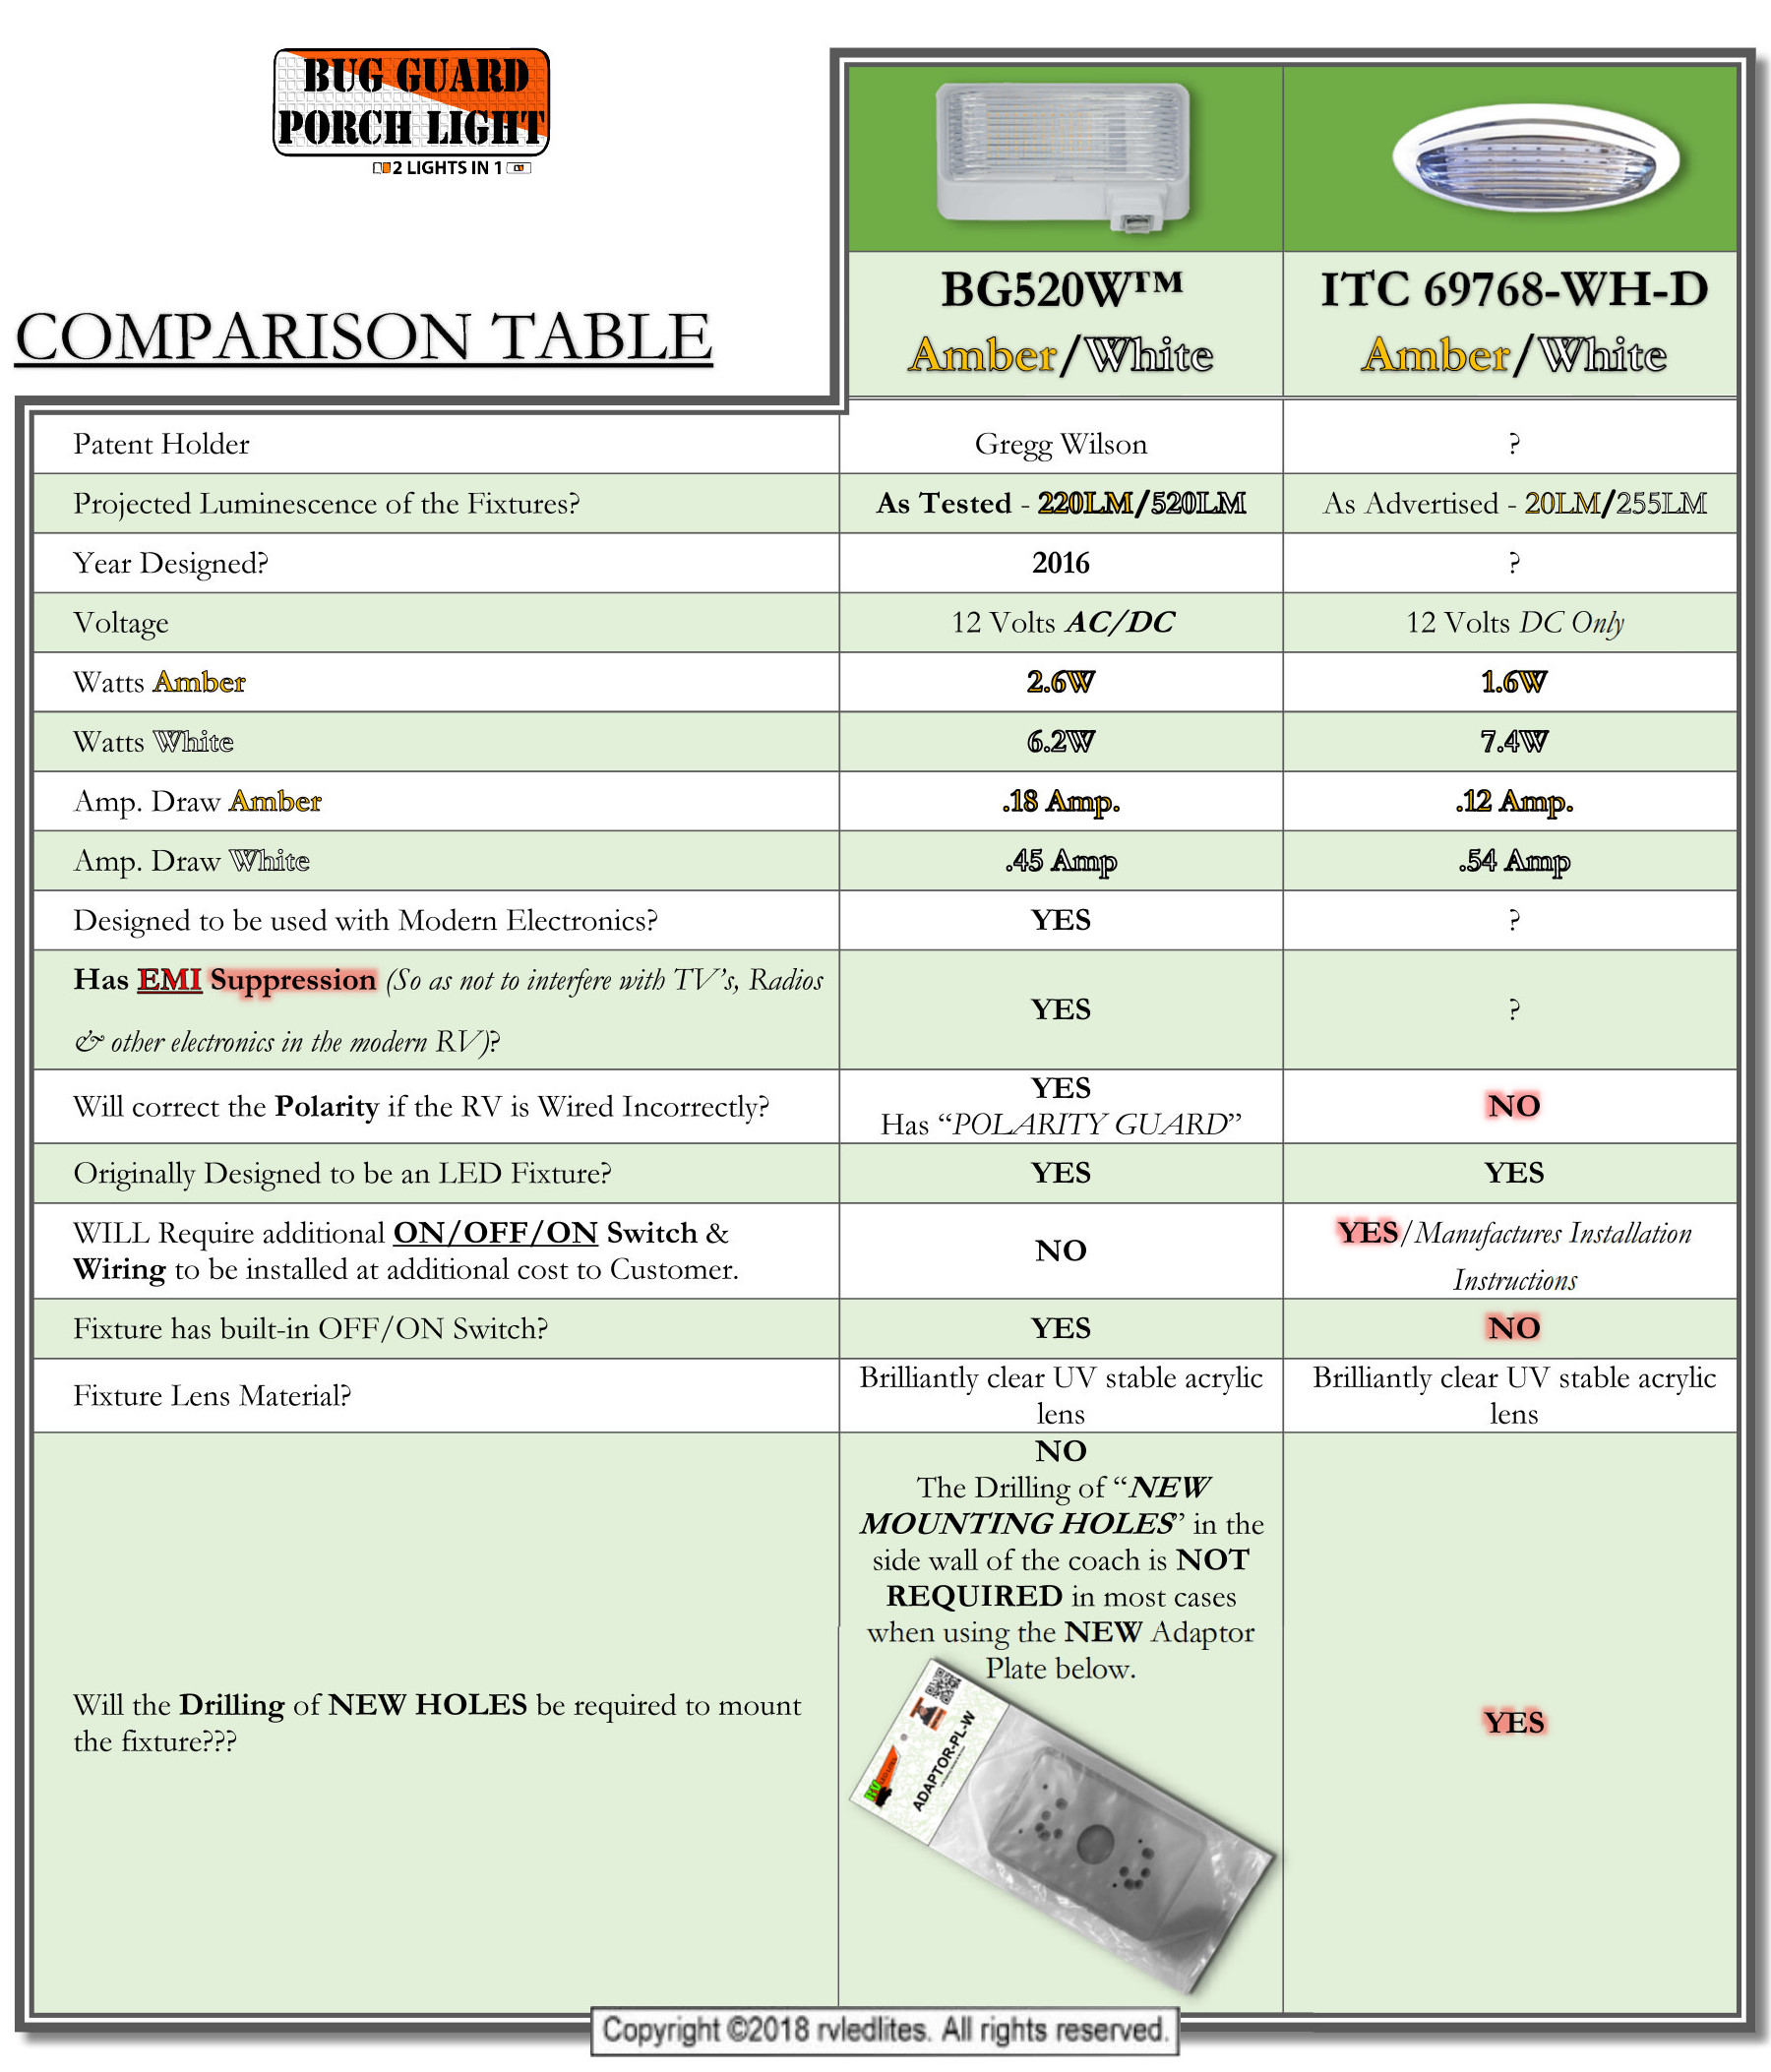 A Comparison Table of the of a similar product that also requires an additional switch and wiring to be installed for this fixture to operate. :-(